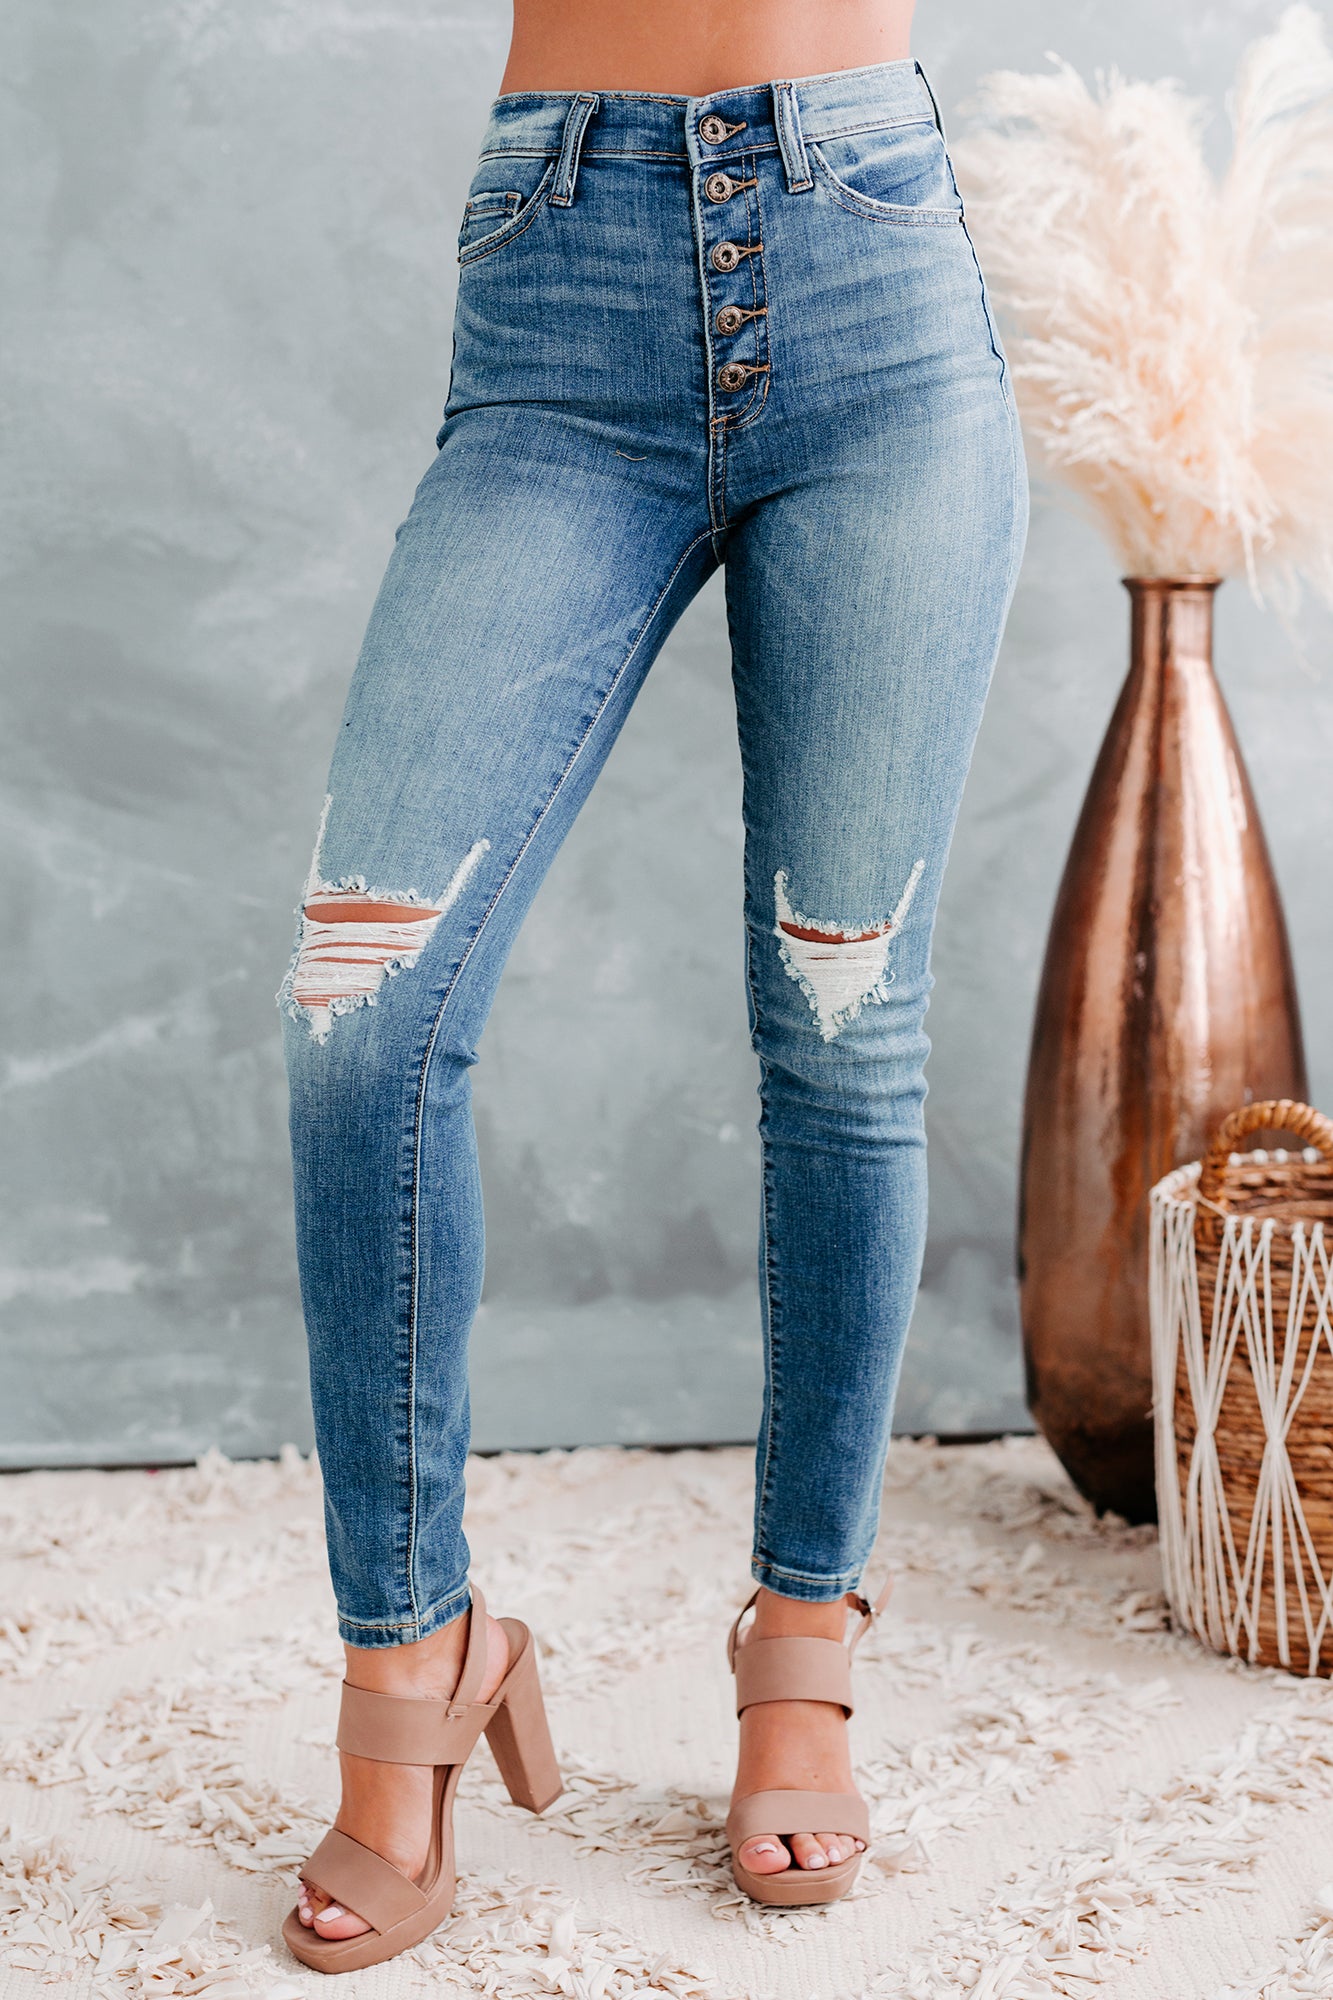 Women's Mid Rise Jeans, Free US Shipping & Returns